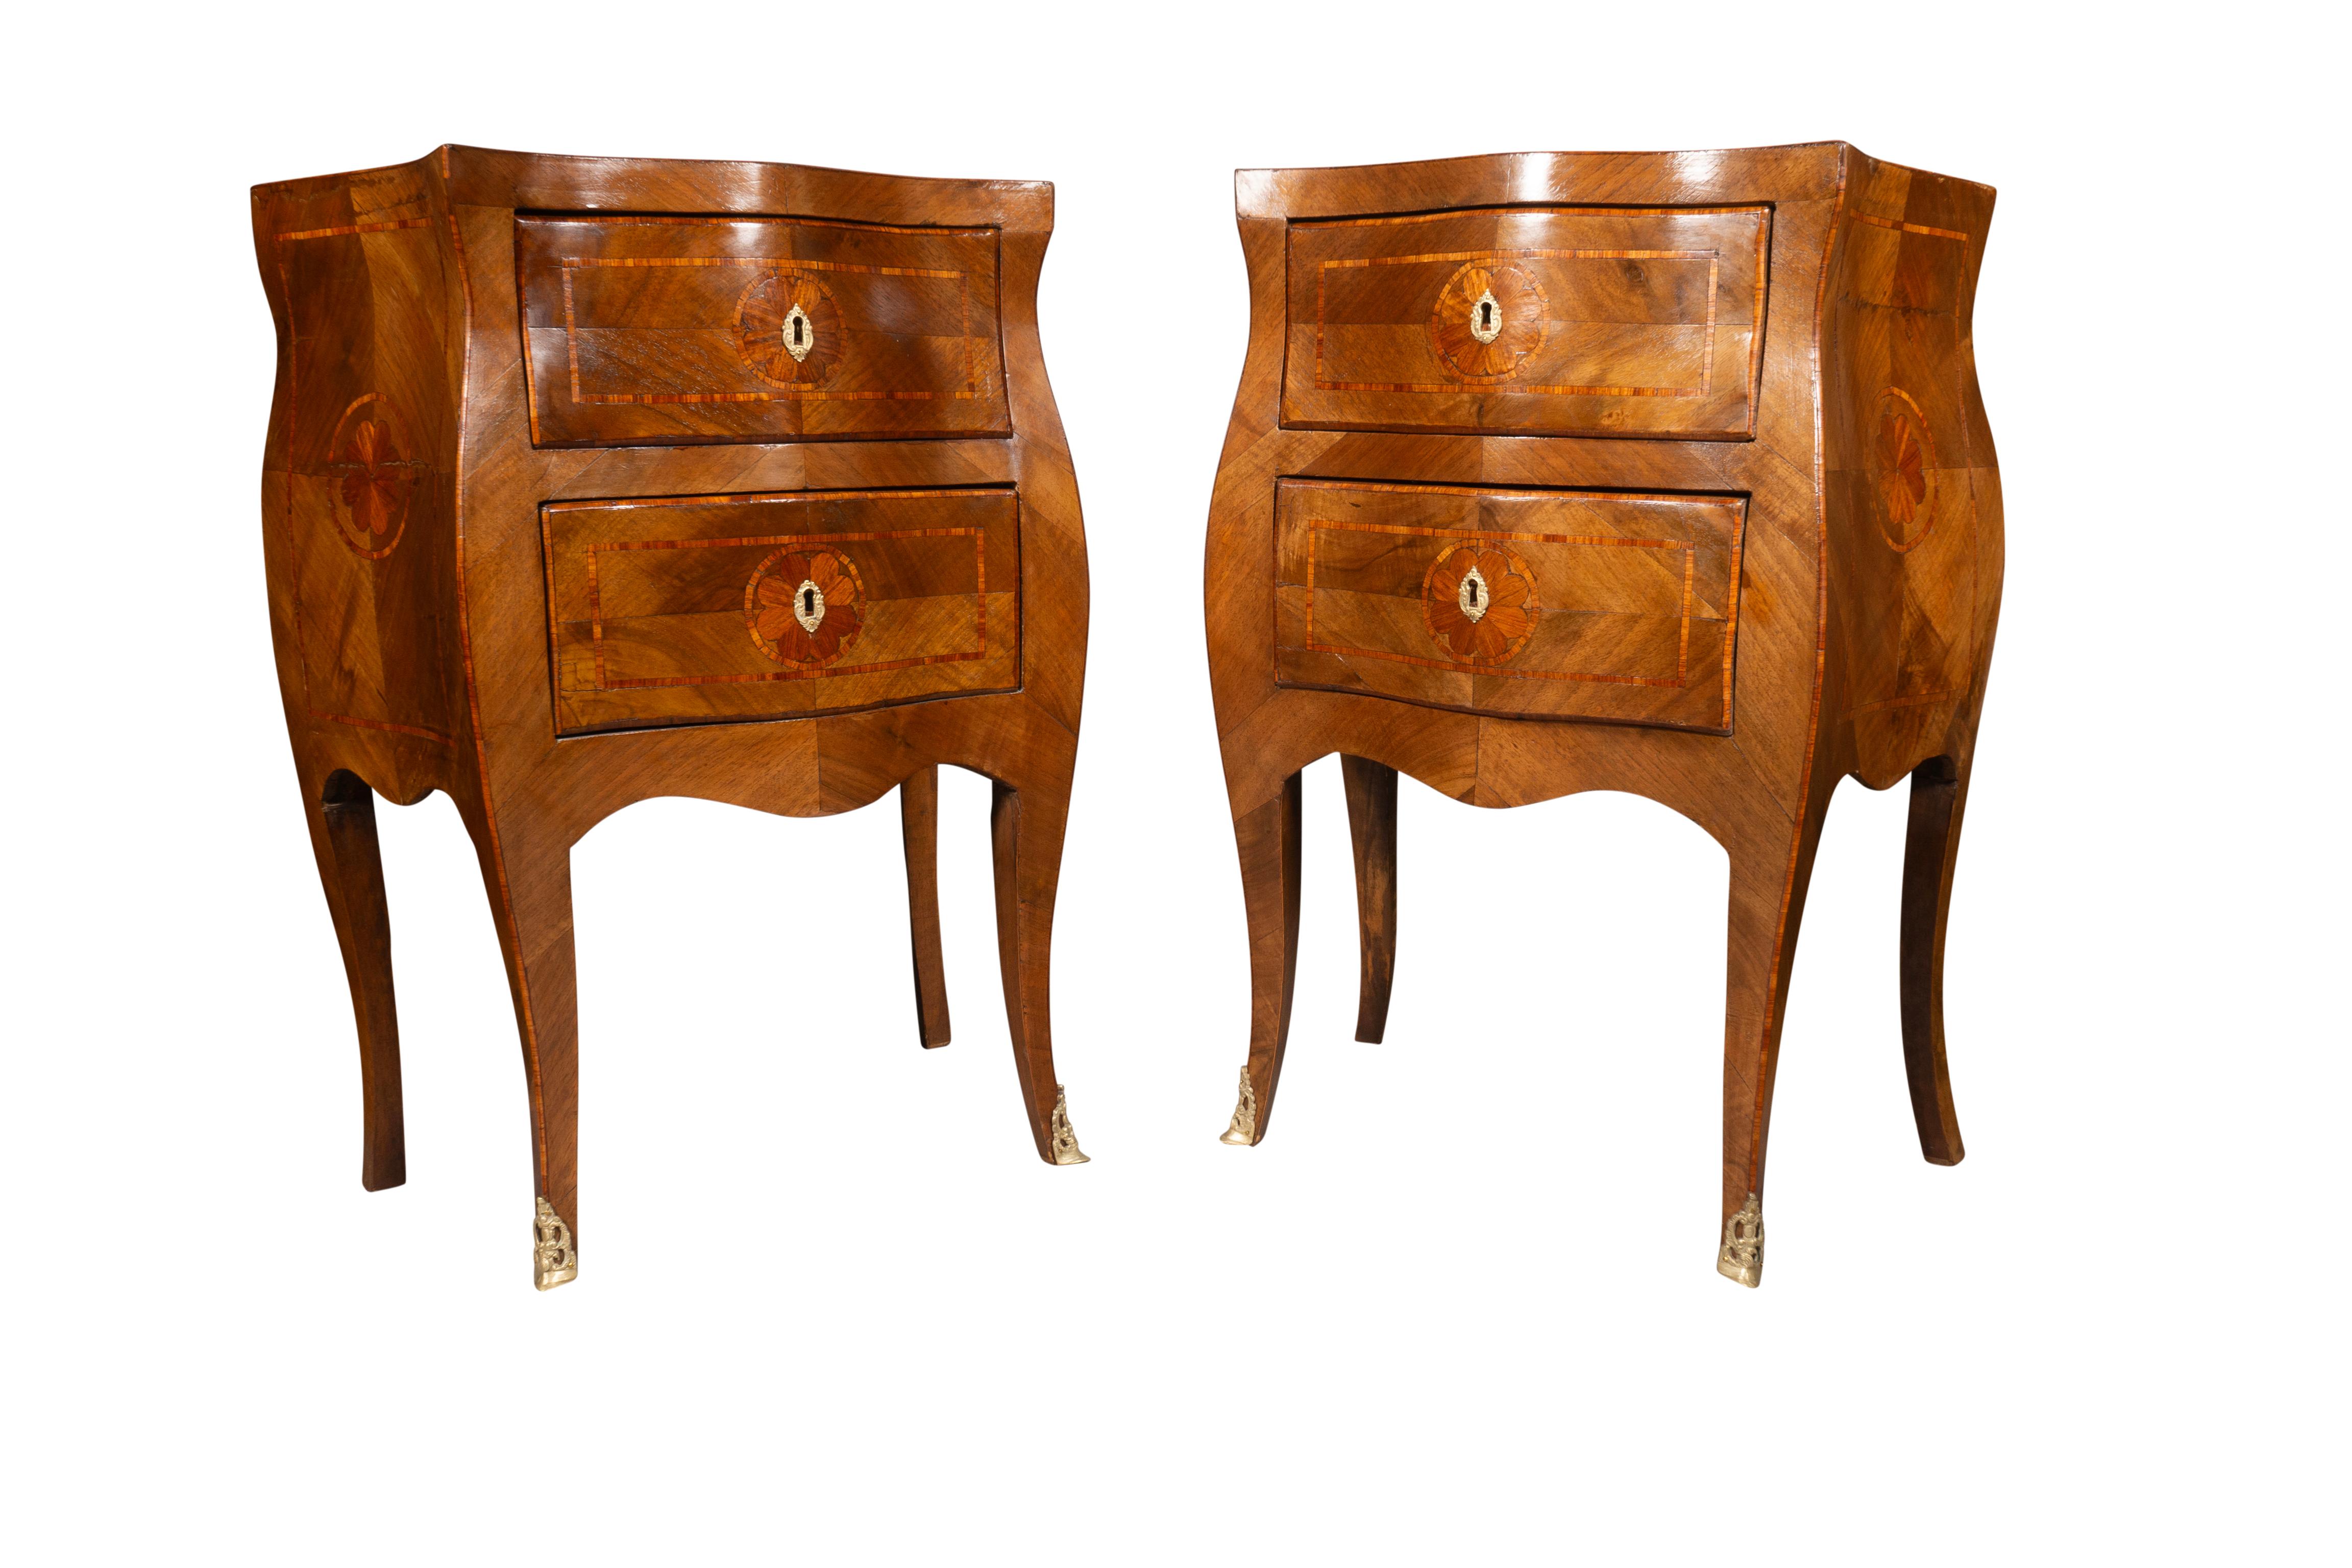 Serpentine top over bombe form two drawers and sides , cabriole legs. Bronze feet.